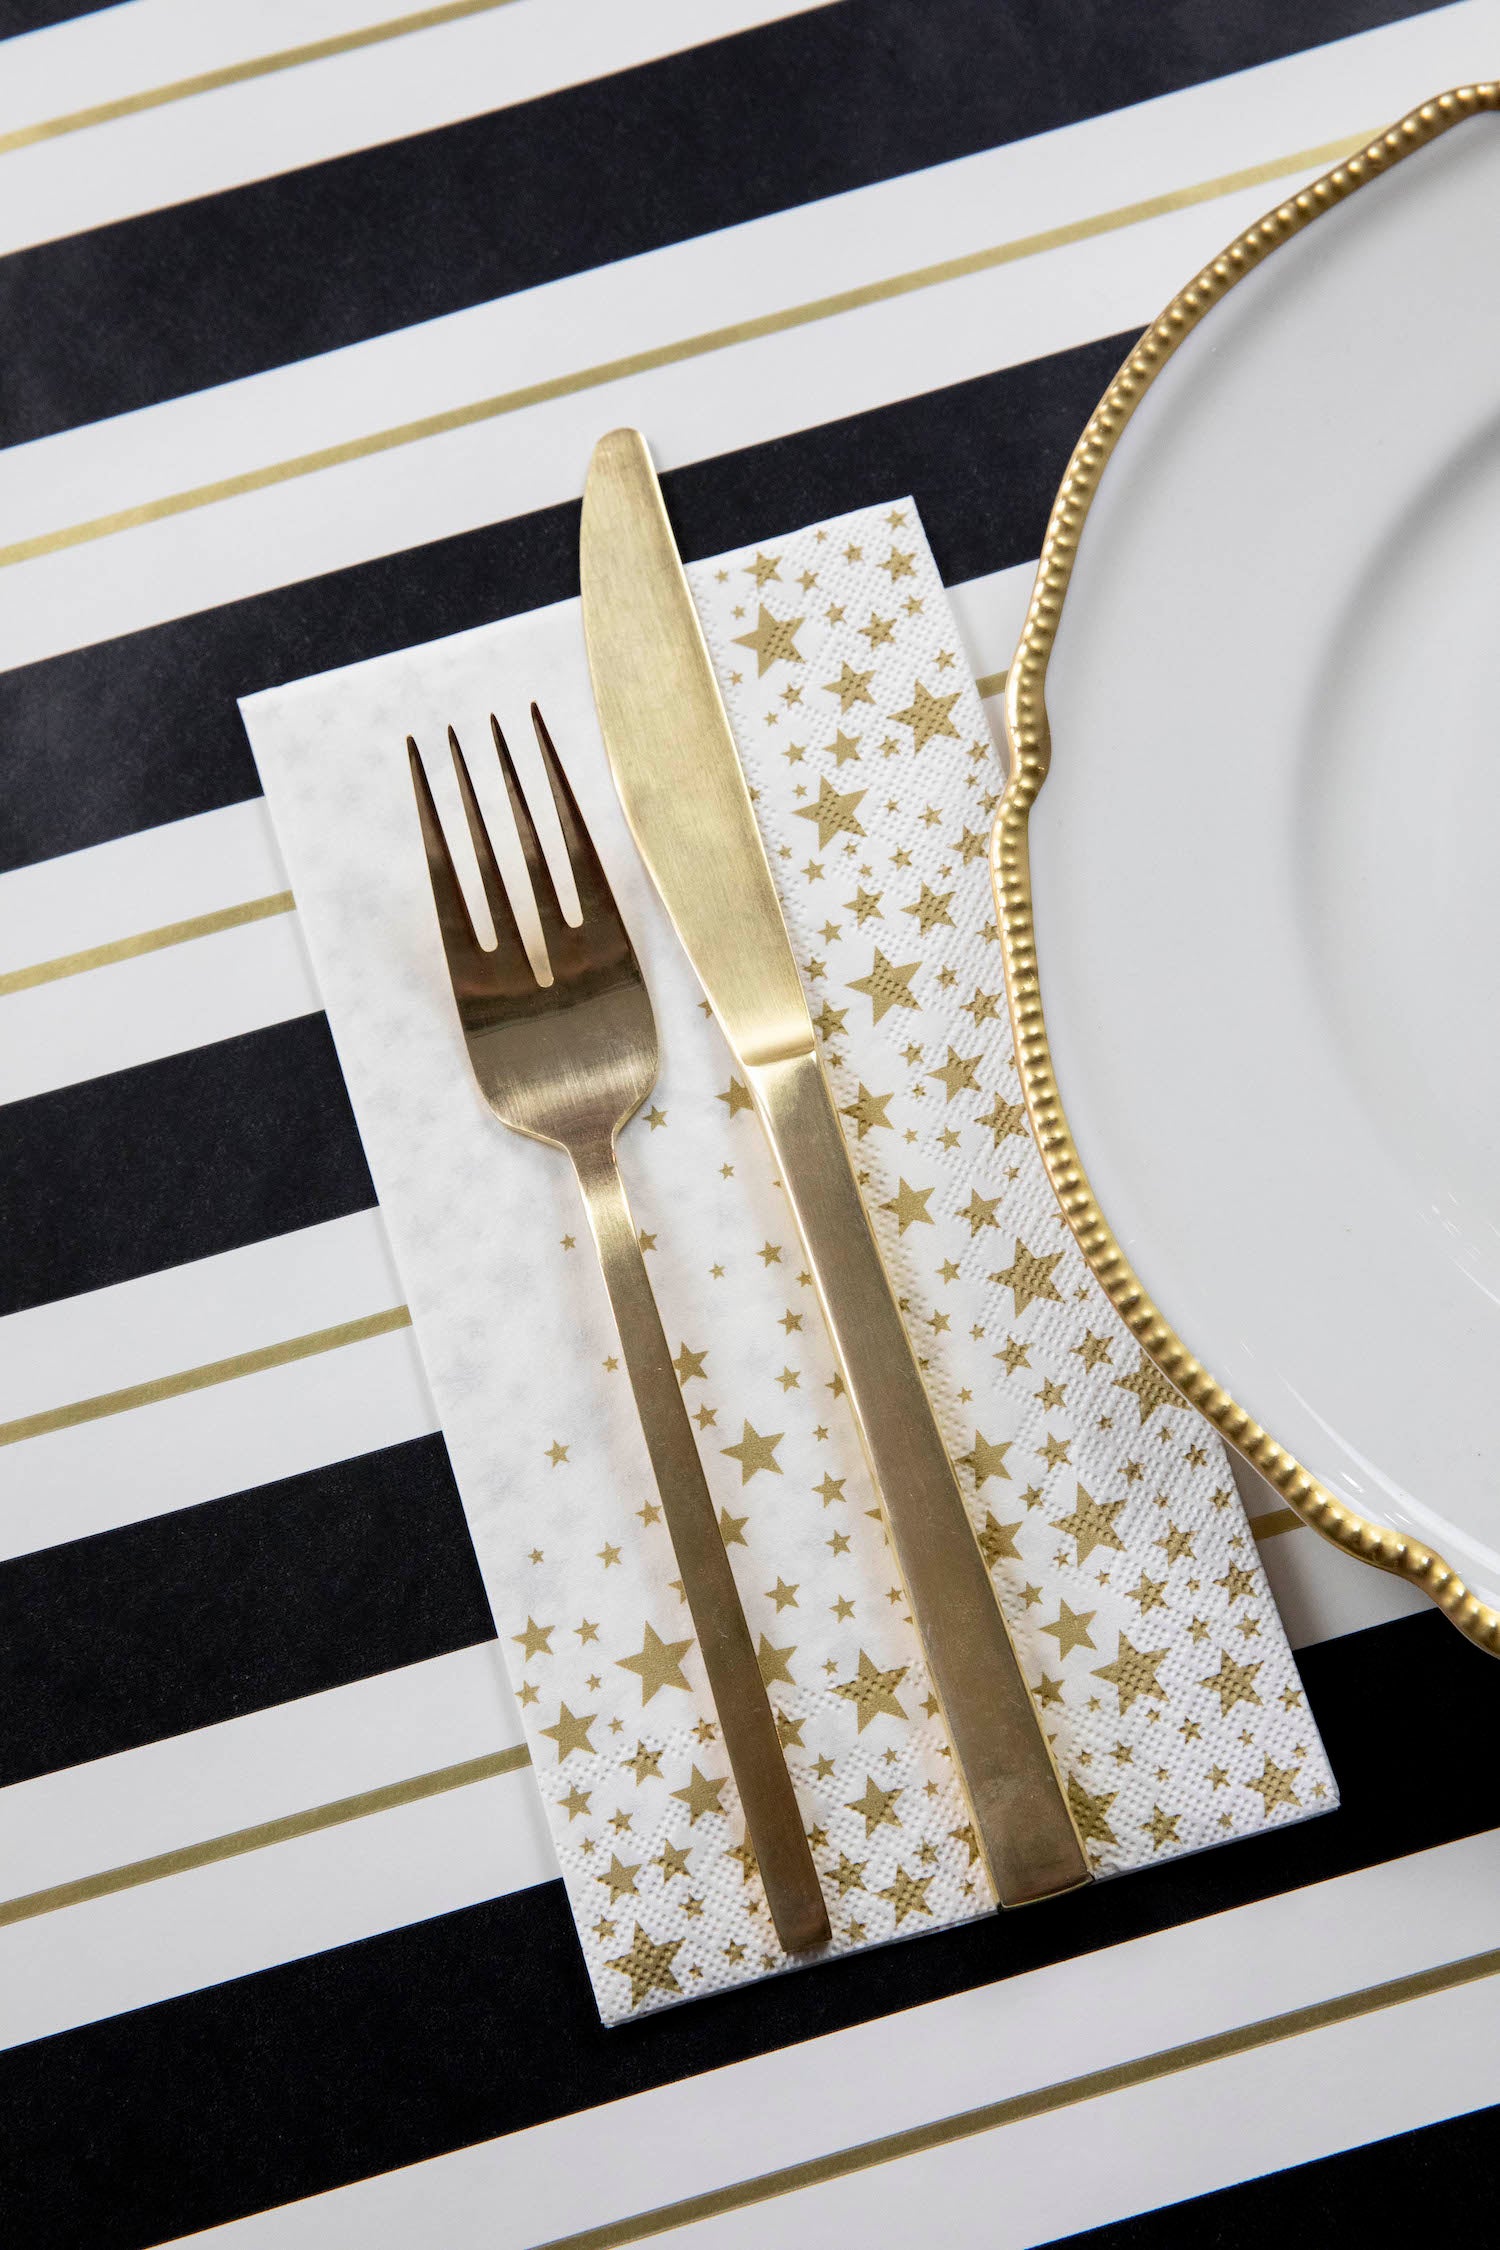 An elegant place setting with a Shining Star Guest Napkin next to the plate.